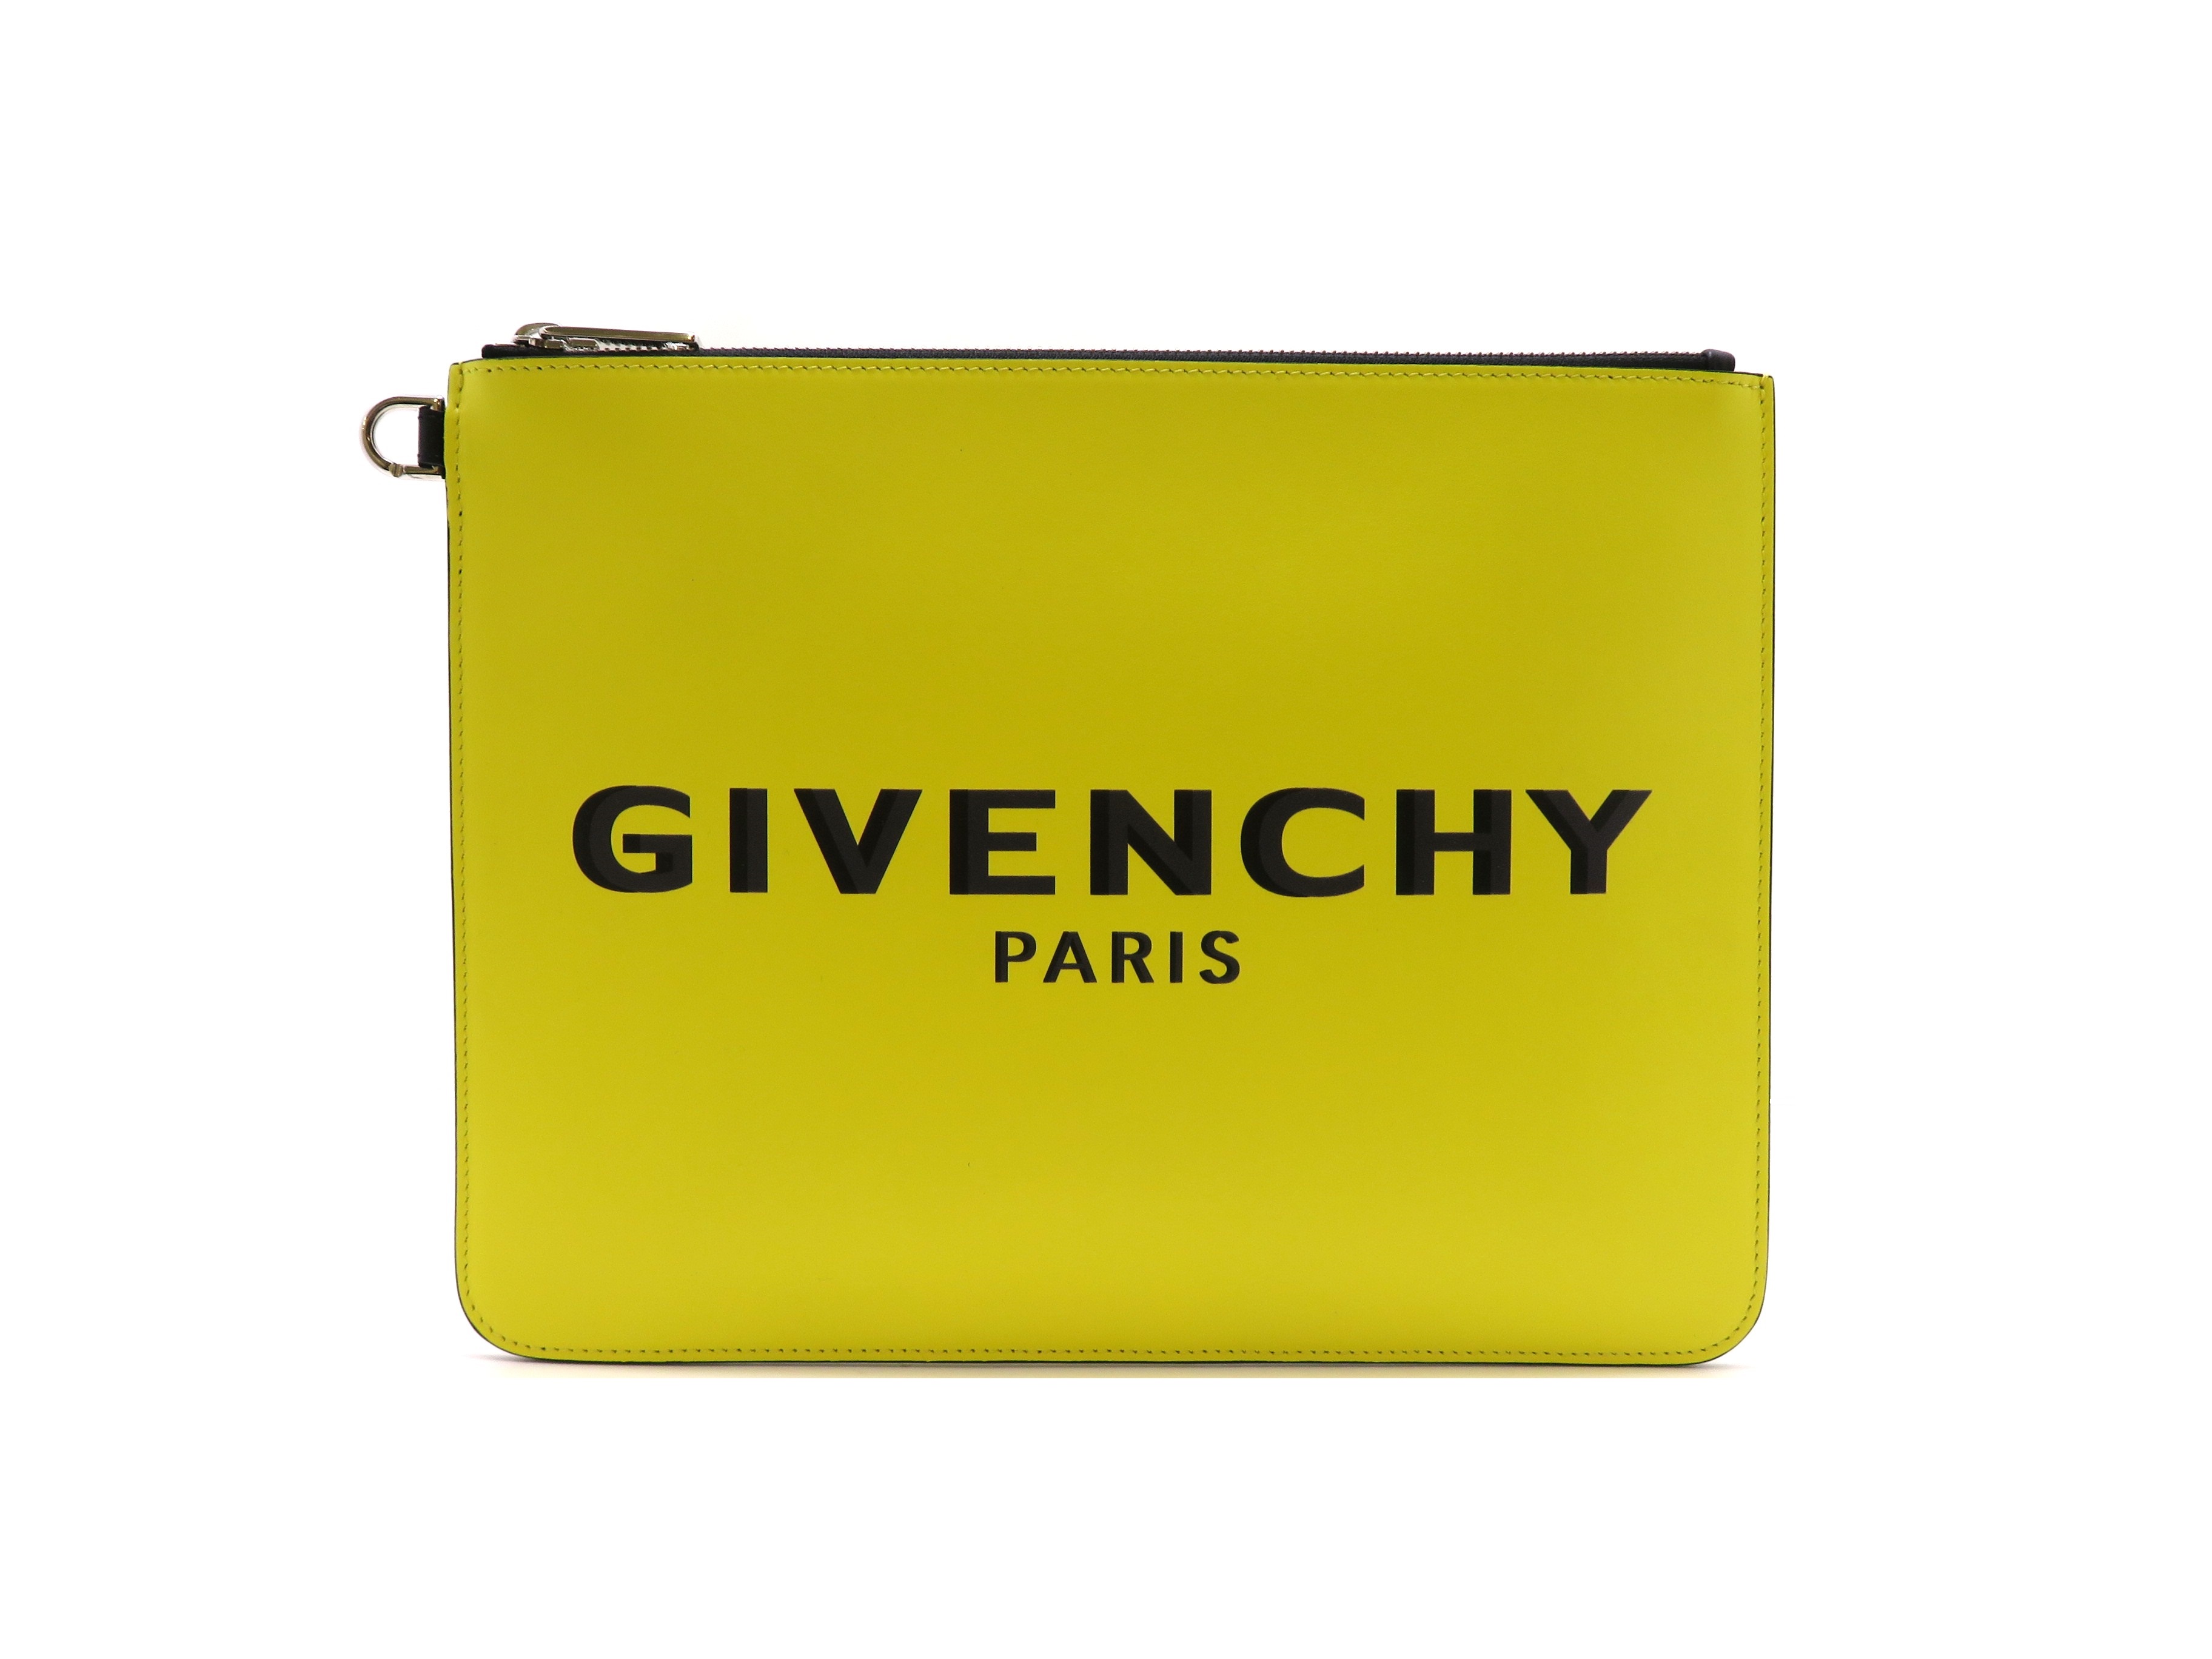 GIVENCHY 新品未使用 クラッチバッグ イエロー